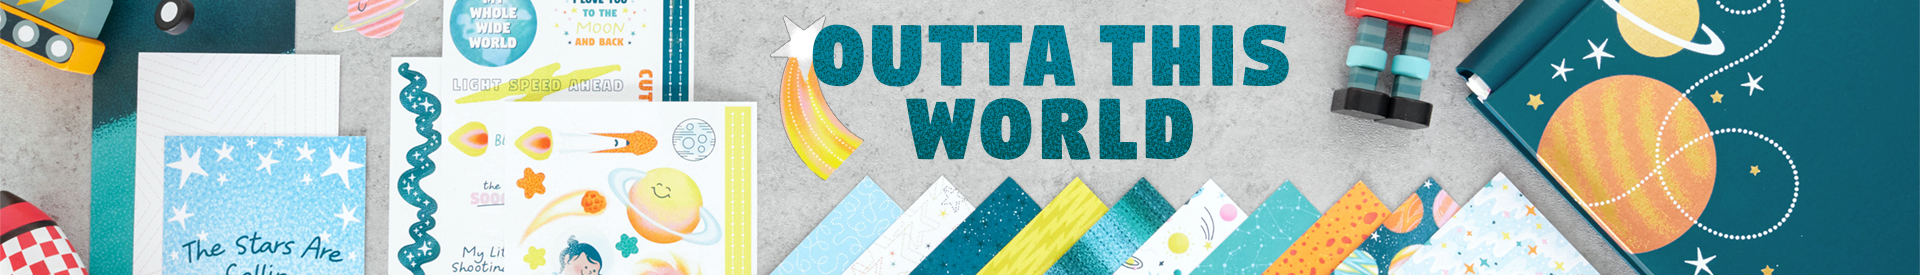 Outer Space Scrapbooking Supplies: Outta This World